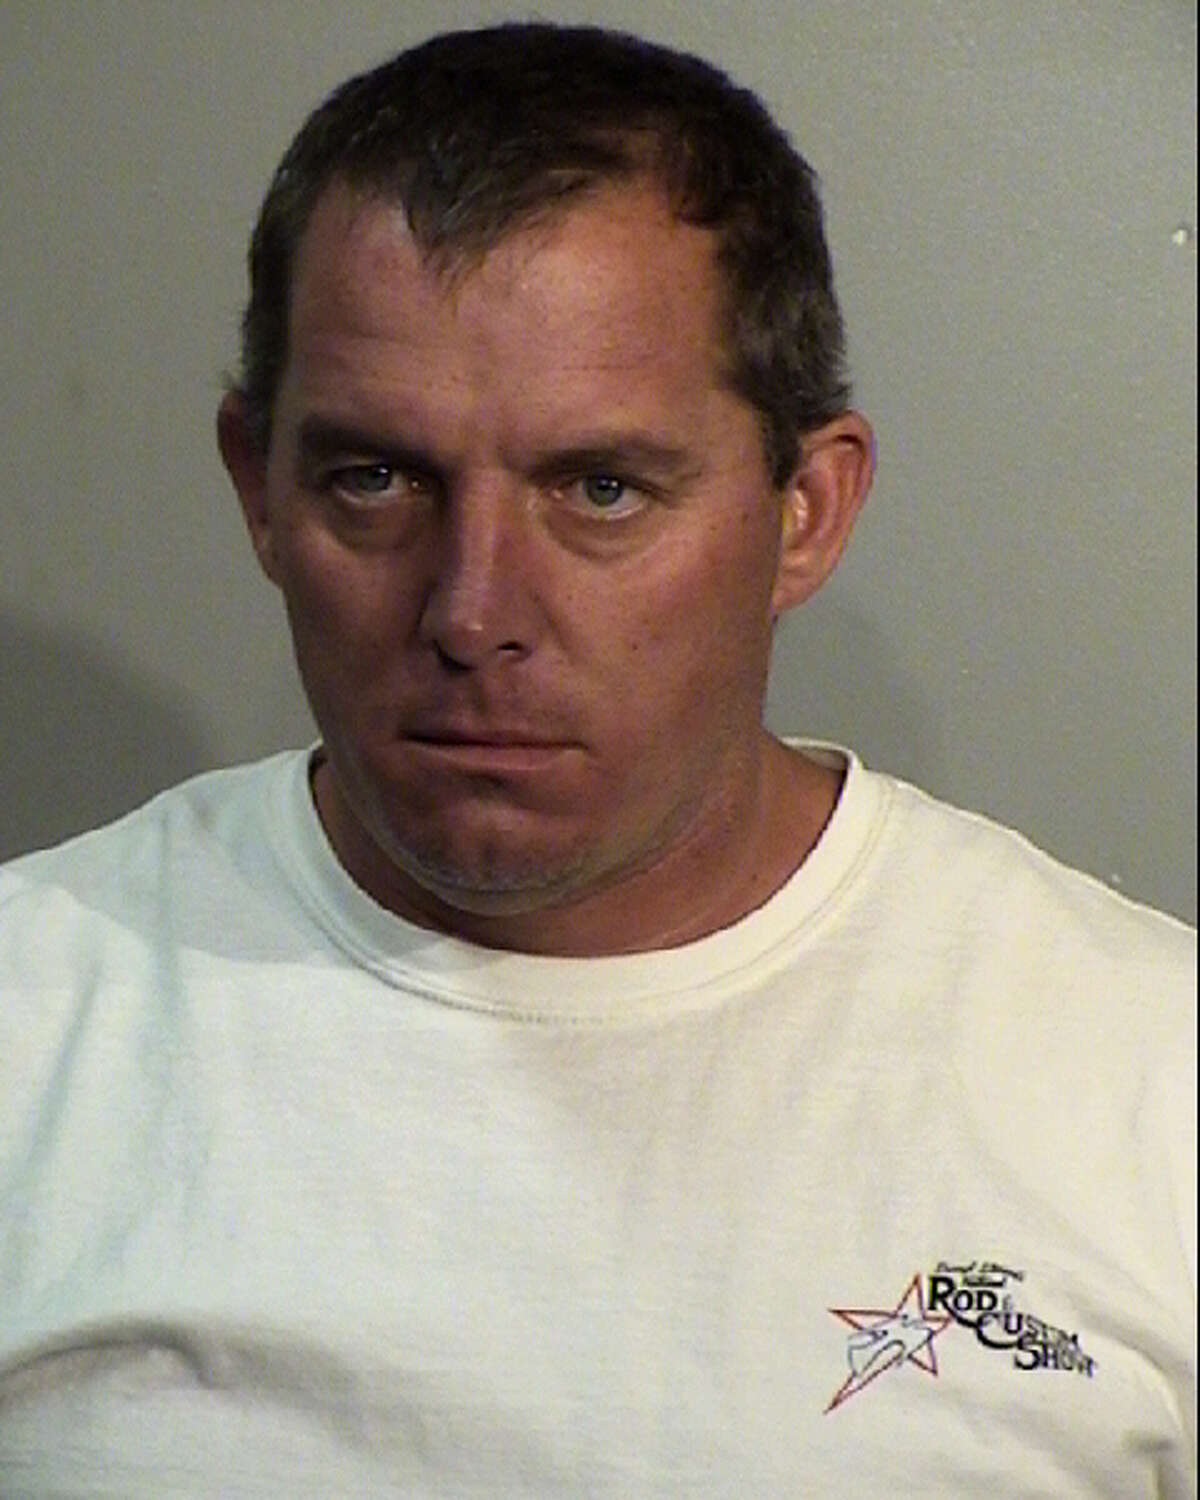 Barry Uhr, 43, faces a charge of continuous violence against the family. He was booked into the Bexar County Jail Friday on a $15,000 bond.